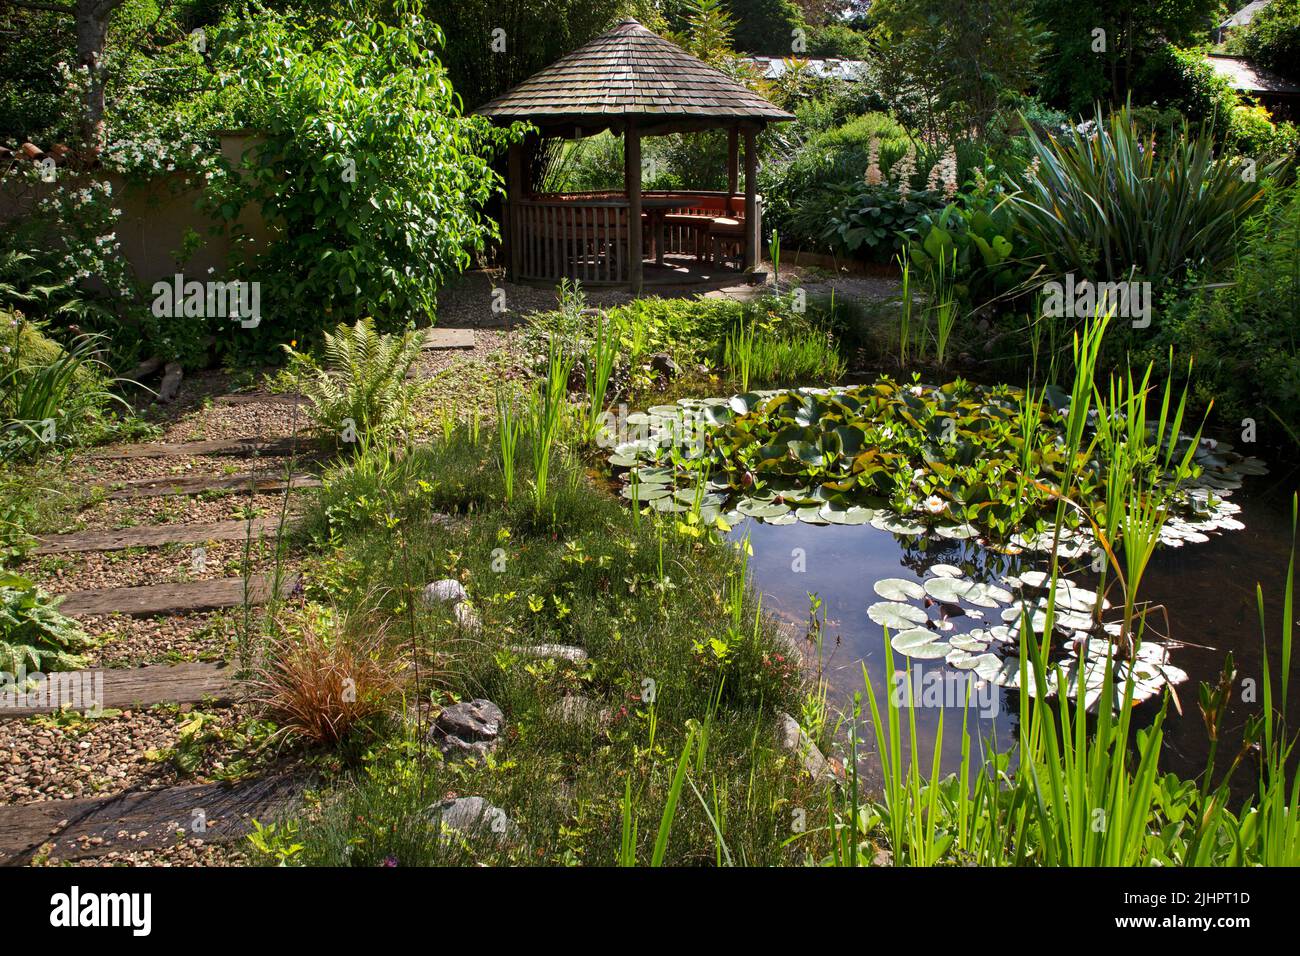 English garden with ornamental pond with summerhouse feature and gravel path with wooden sleepers, England Stock Photo